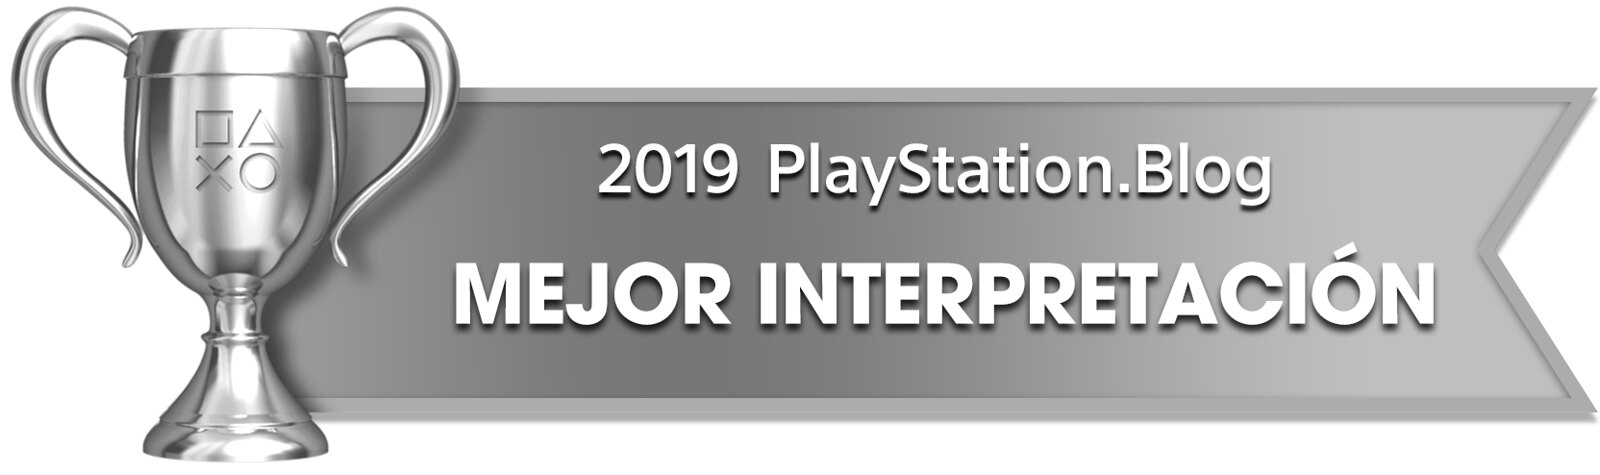 PS Blog Game of the Year 2019 - Best Performance - 3 - Silver